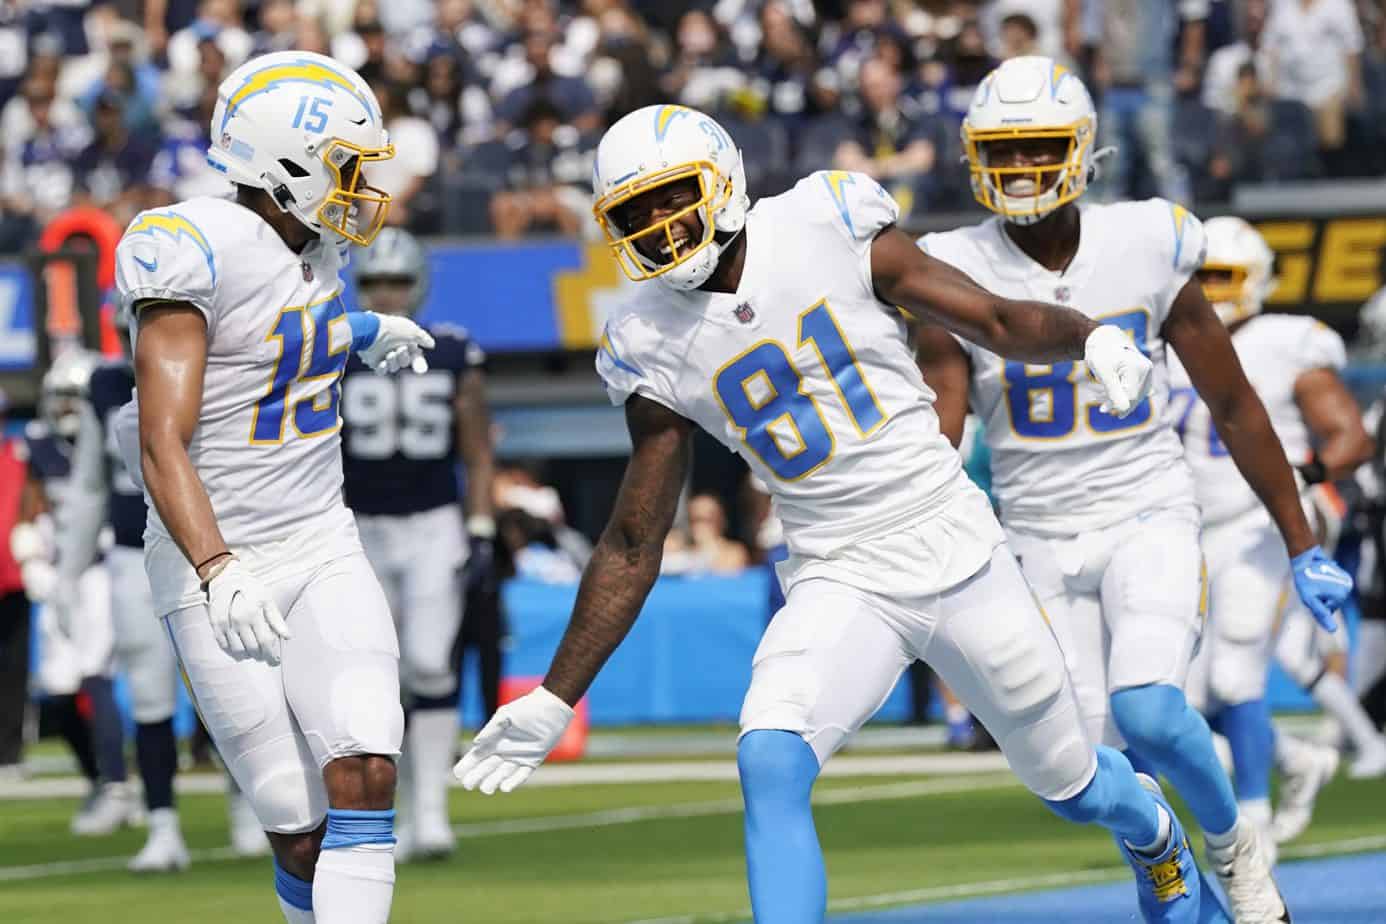 NFL best bets betting picks and parlays same game DraftKings FanDuel today tonight Thursday night Football Chiefs vs. CHargers predictions free expert advice tips strategy odds lines projections